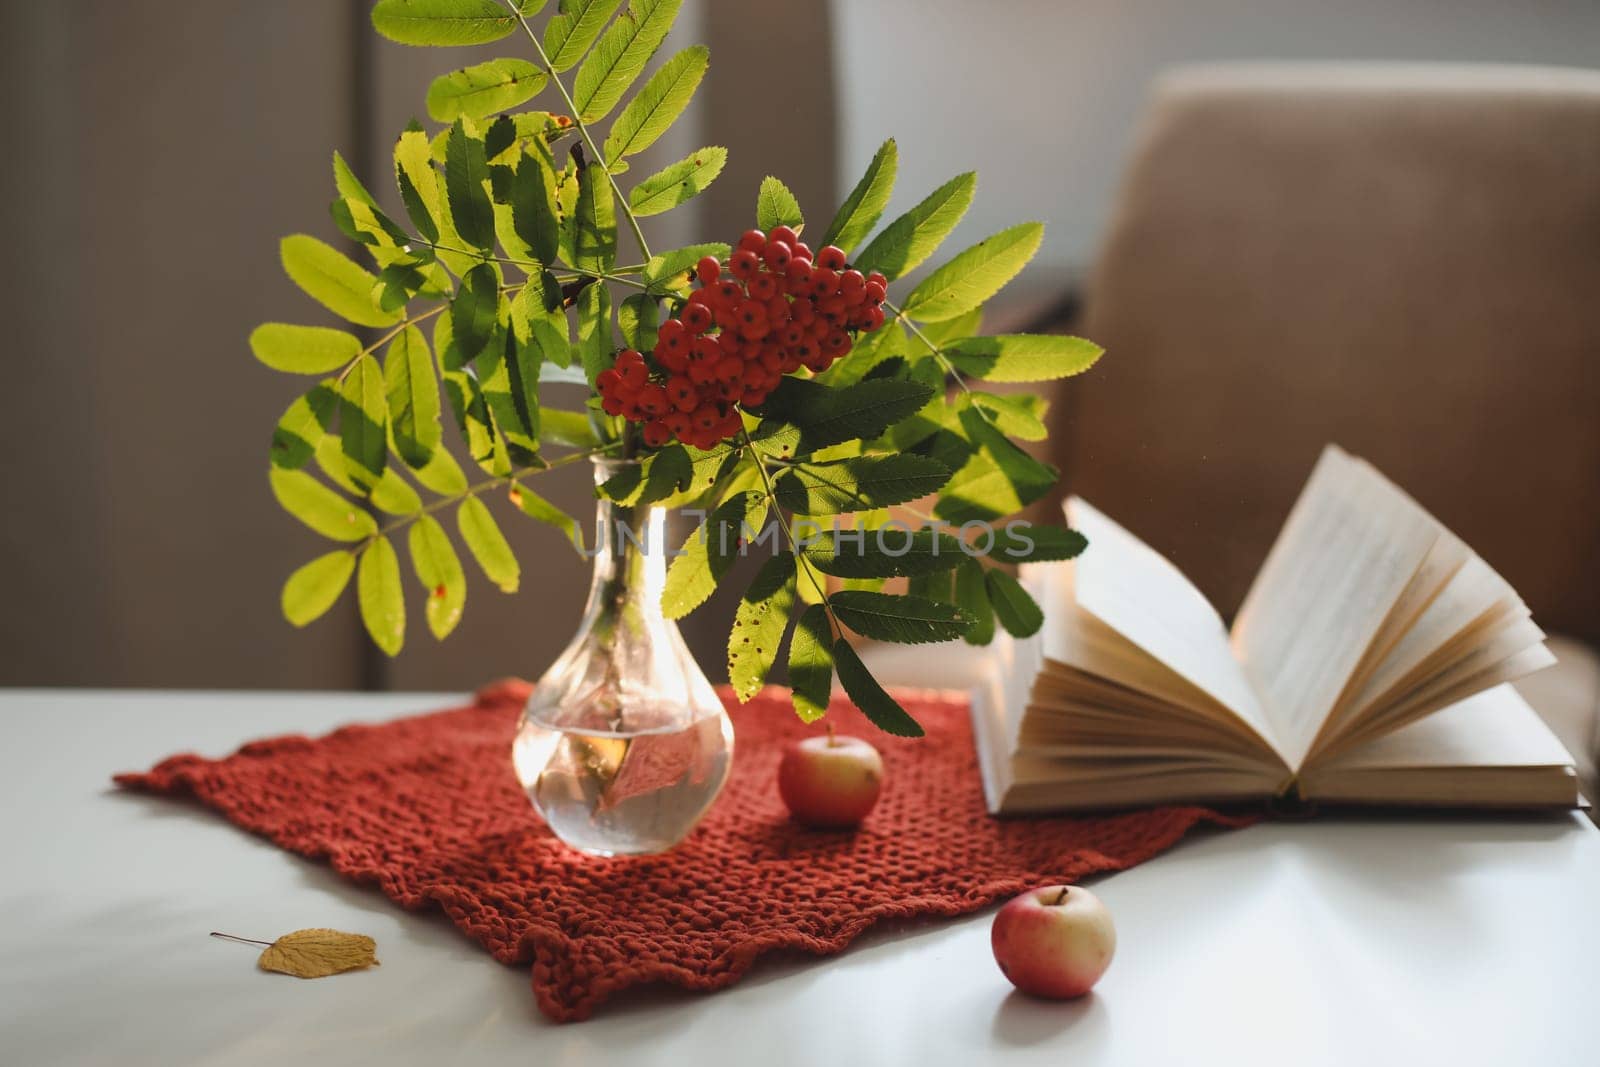 autumn still life with a rowan branch in a vase and a book and apples in a cozy home interior